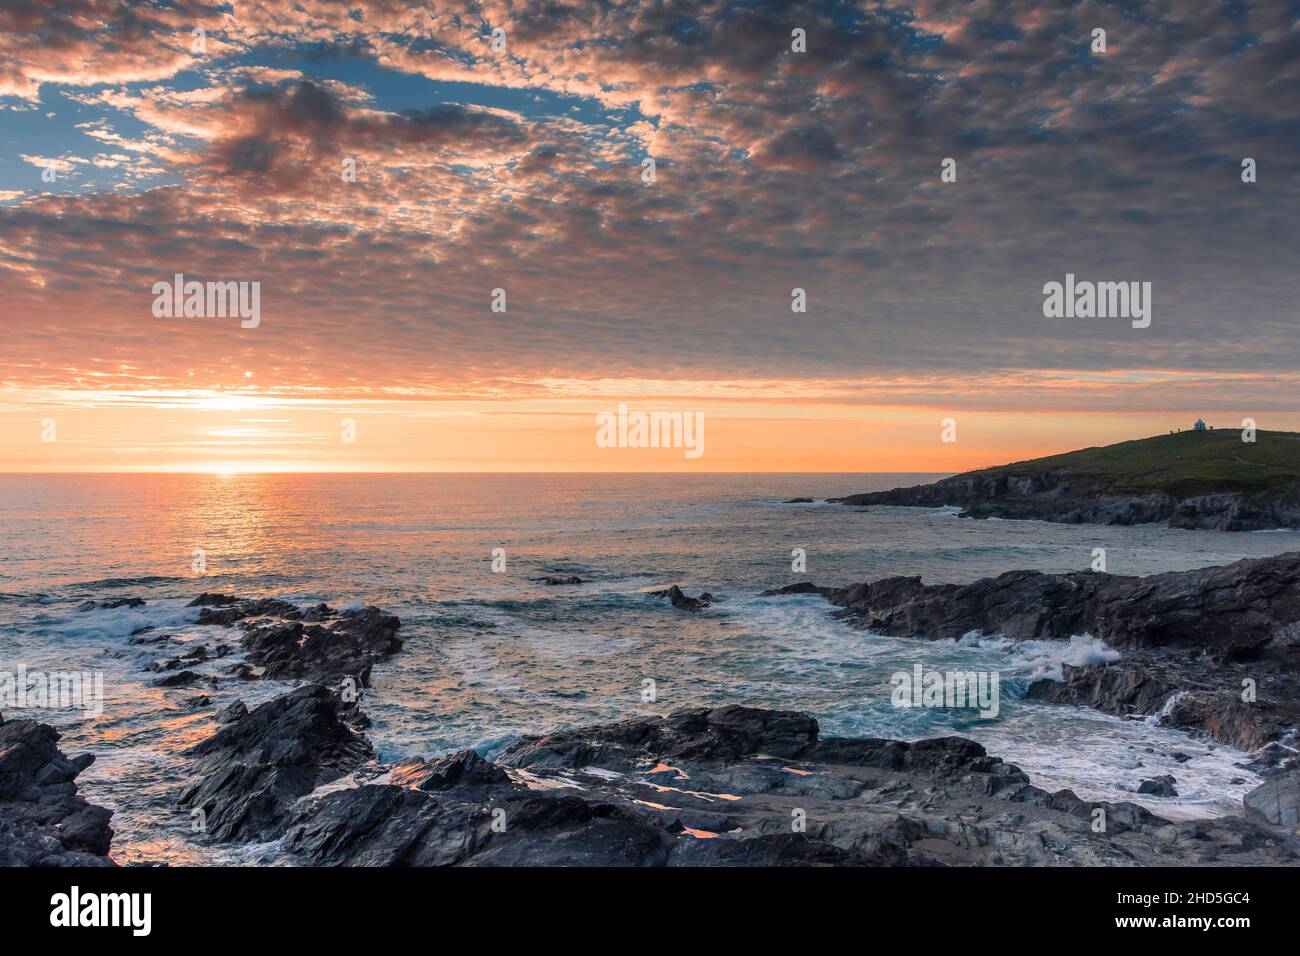 A beautiful colourful sunset over Fistral Bay on the coast of Newquay in Cornwall. Stock Photo